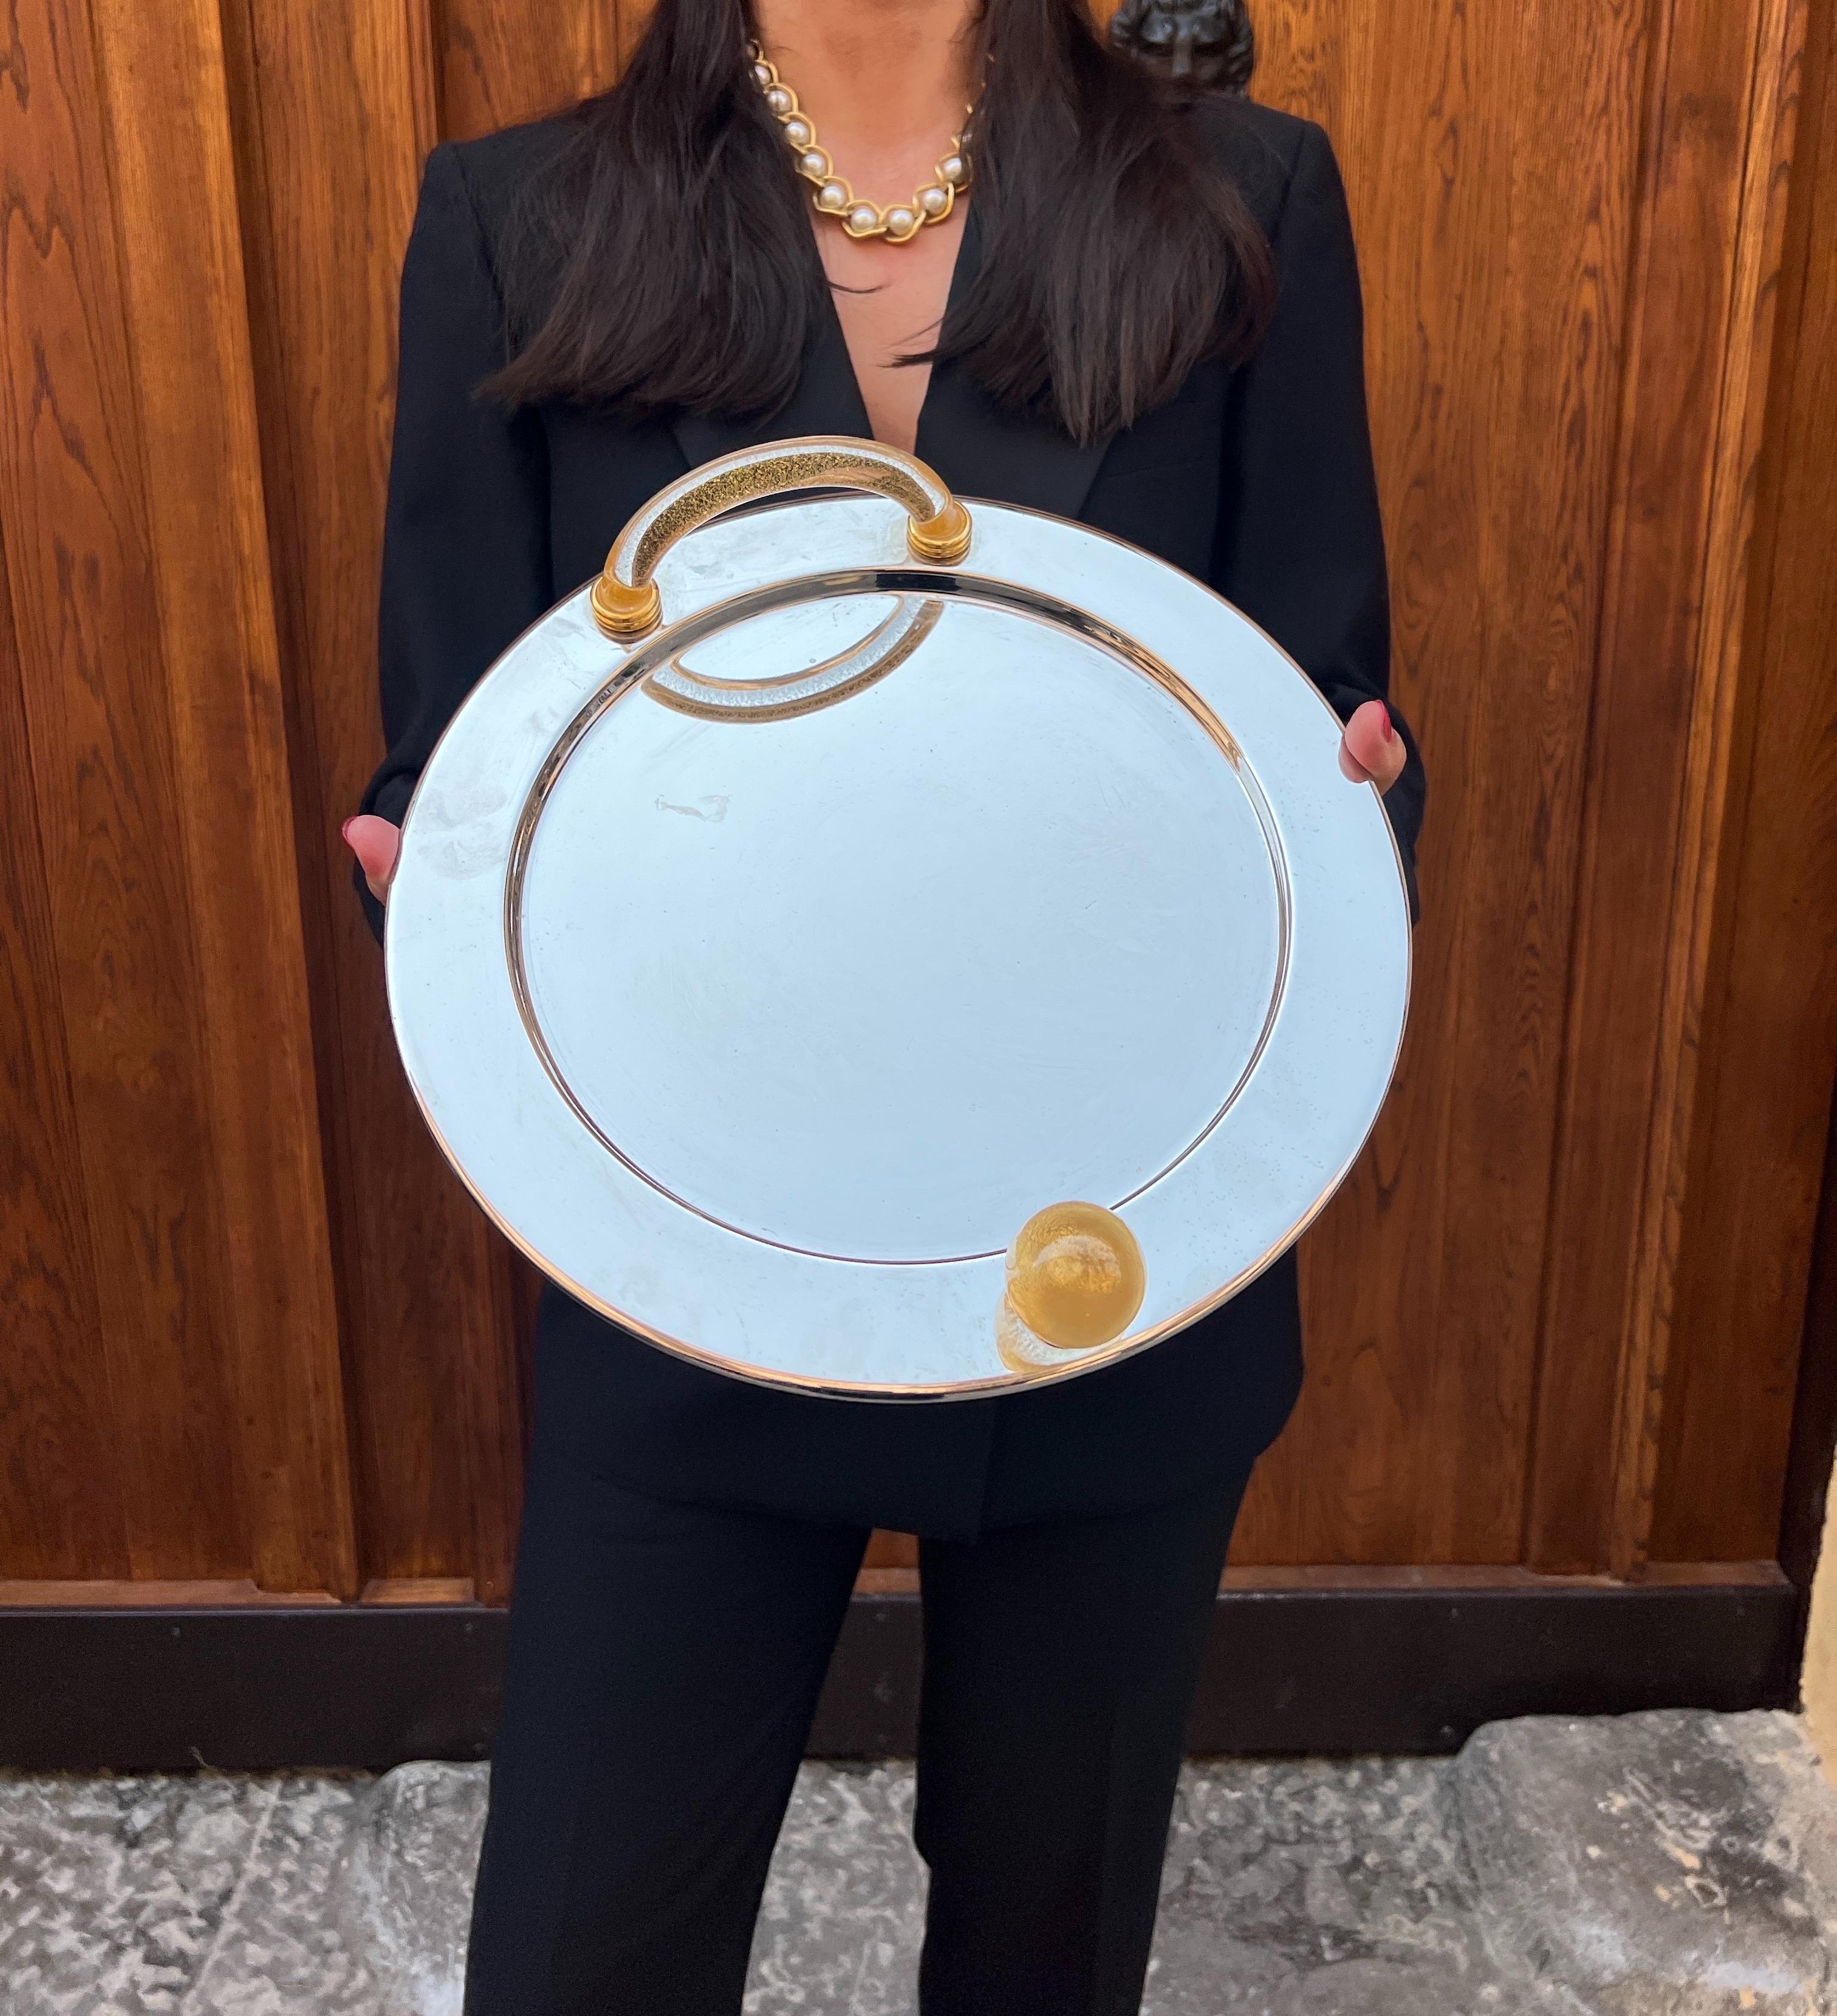 Presius Palladium plated serving tray, a true embodiment of luxury. This opulent piece is adorned with Murano glass handles, perfect for serving drinks at lavish dinner parties or serving as a centerpiece on your dining table.

The Murano glass